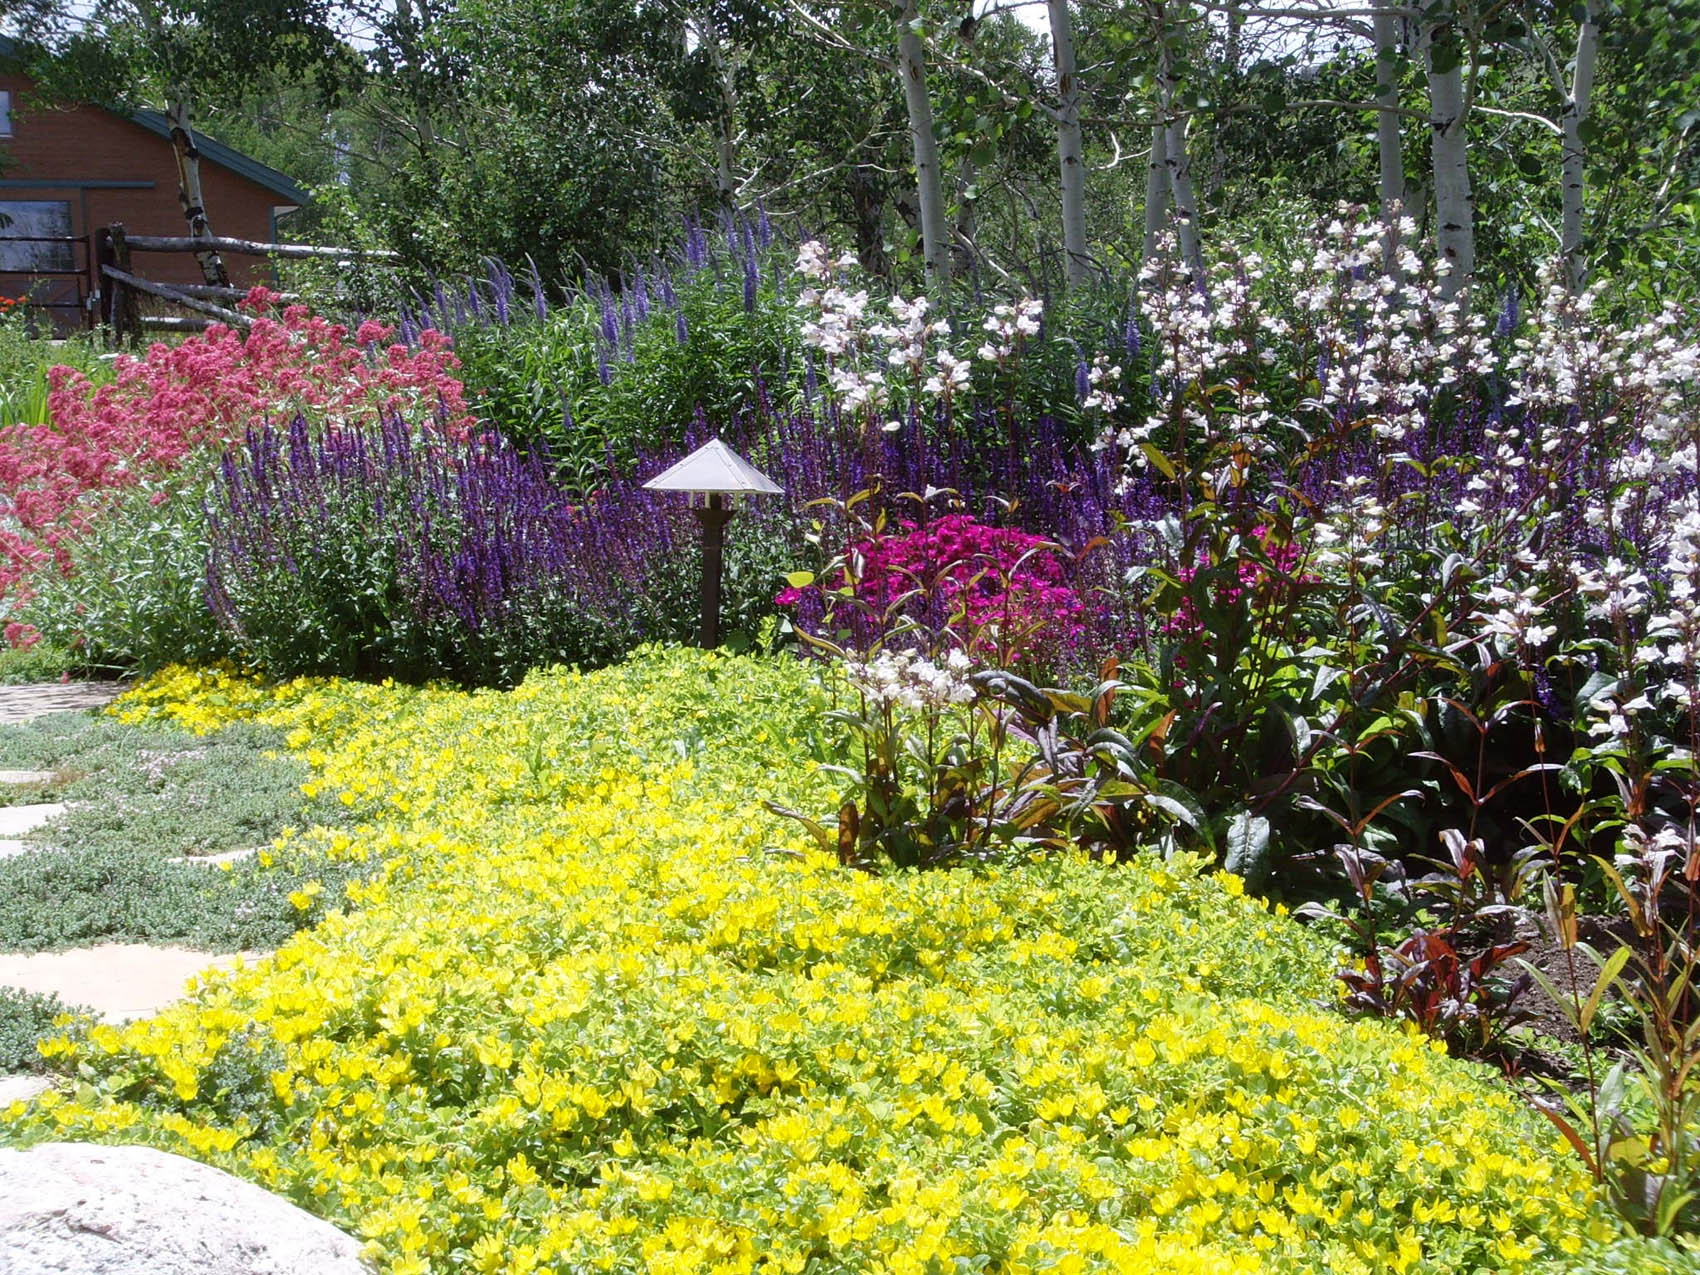 A vibrant garden flourishing with yellow, purple, and pink flowers, stone pathways, a small lamp post, surrounded by trees and a structure in the background.